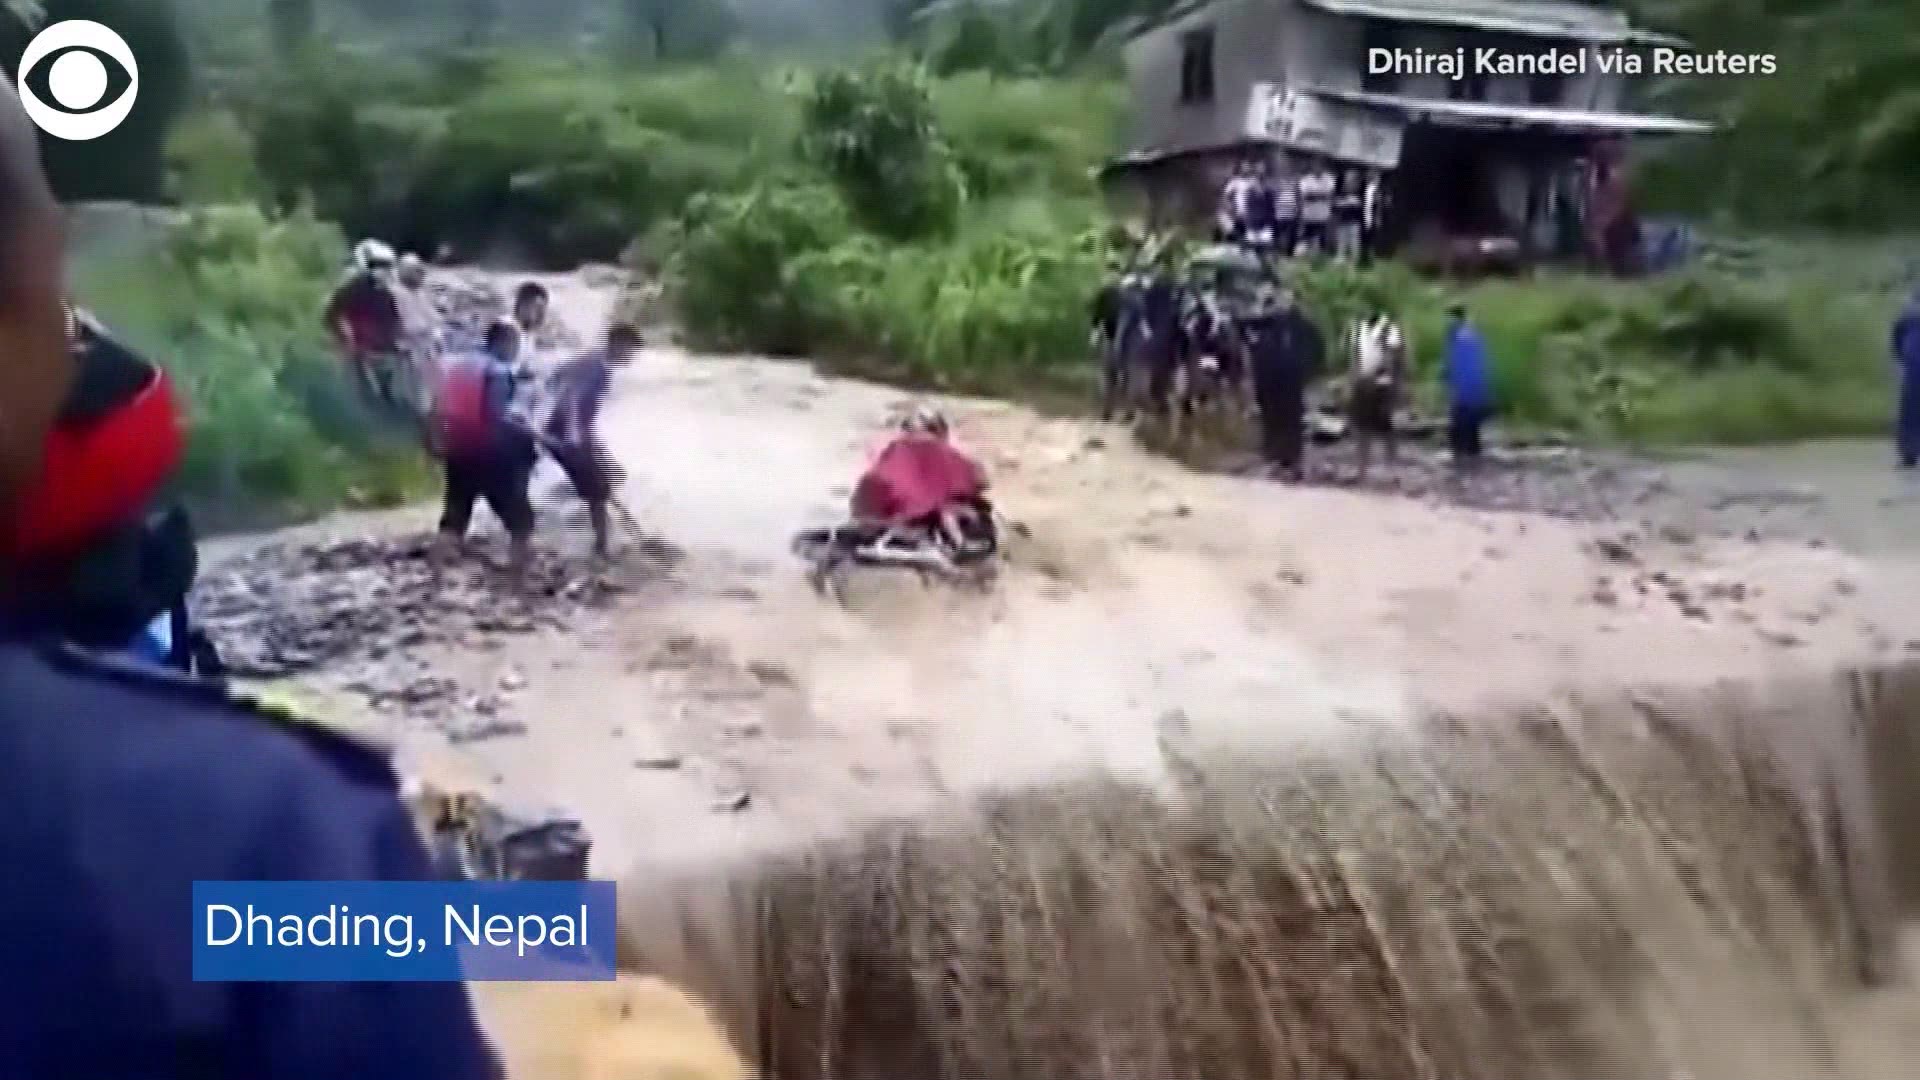 Watch the moment floodwaters swept a motorcyclist off the road in Nepal. Witnesses were able to rescue the man and even the motorcycle.